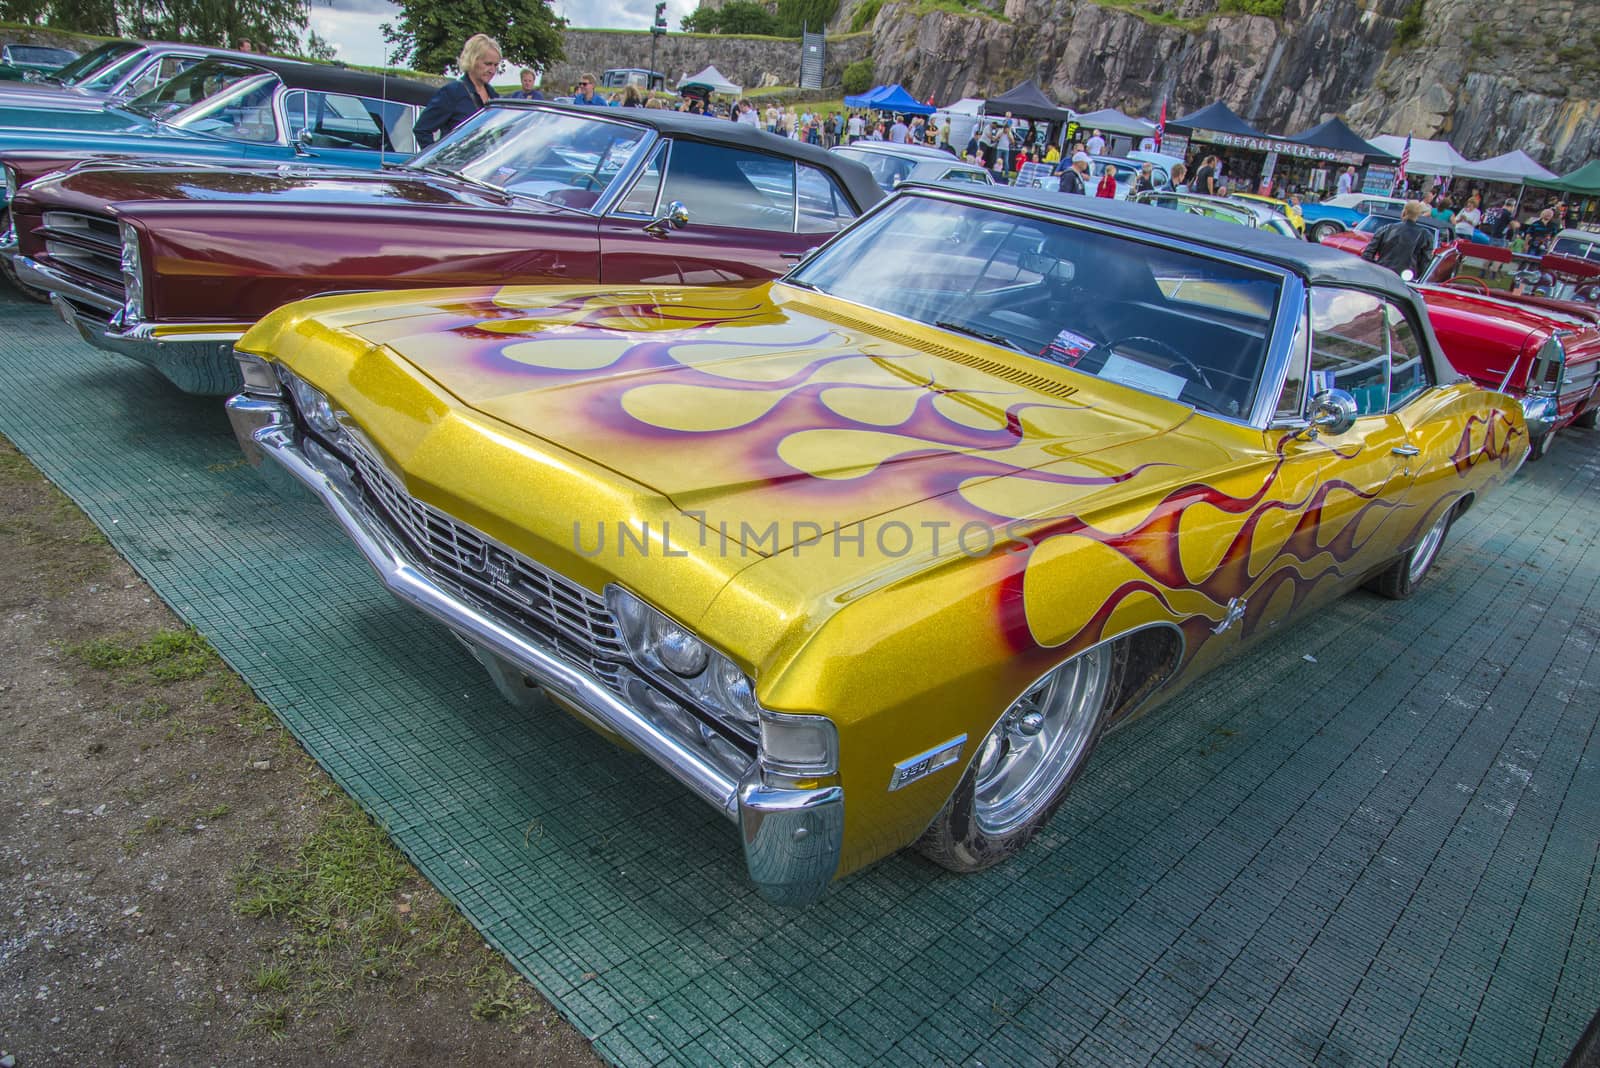 The image is shot at Fredriksten fortress in Halden, Norway during the annual classic car event.